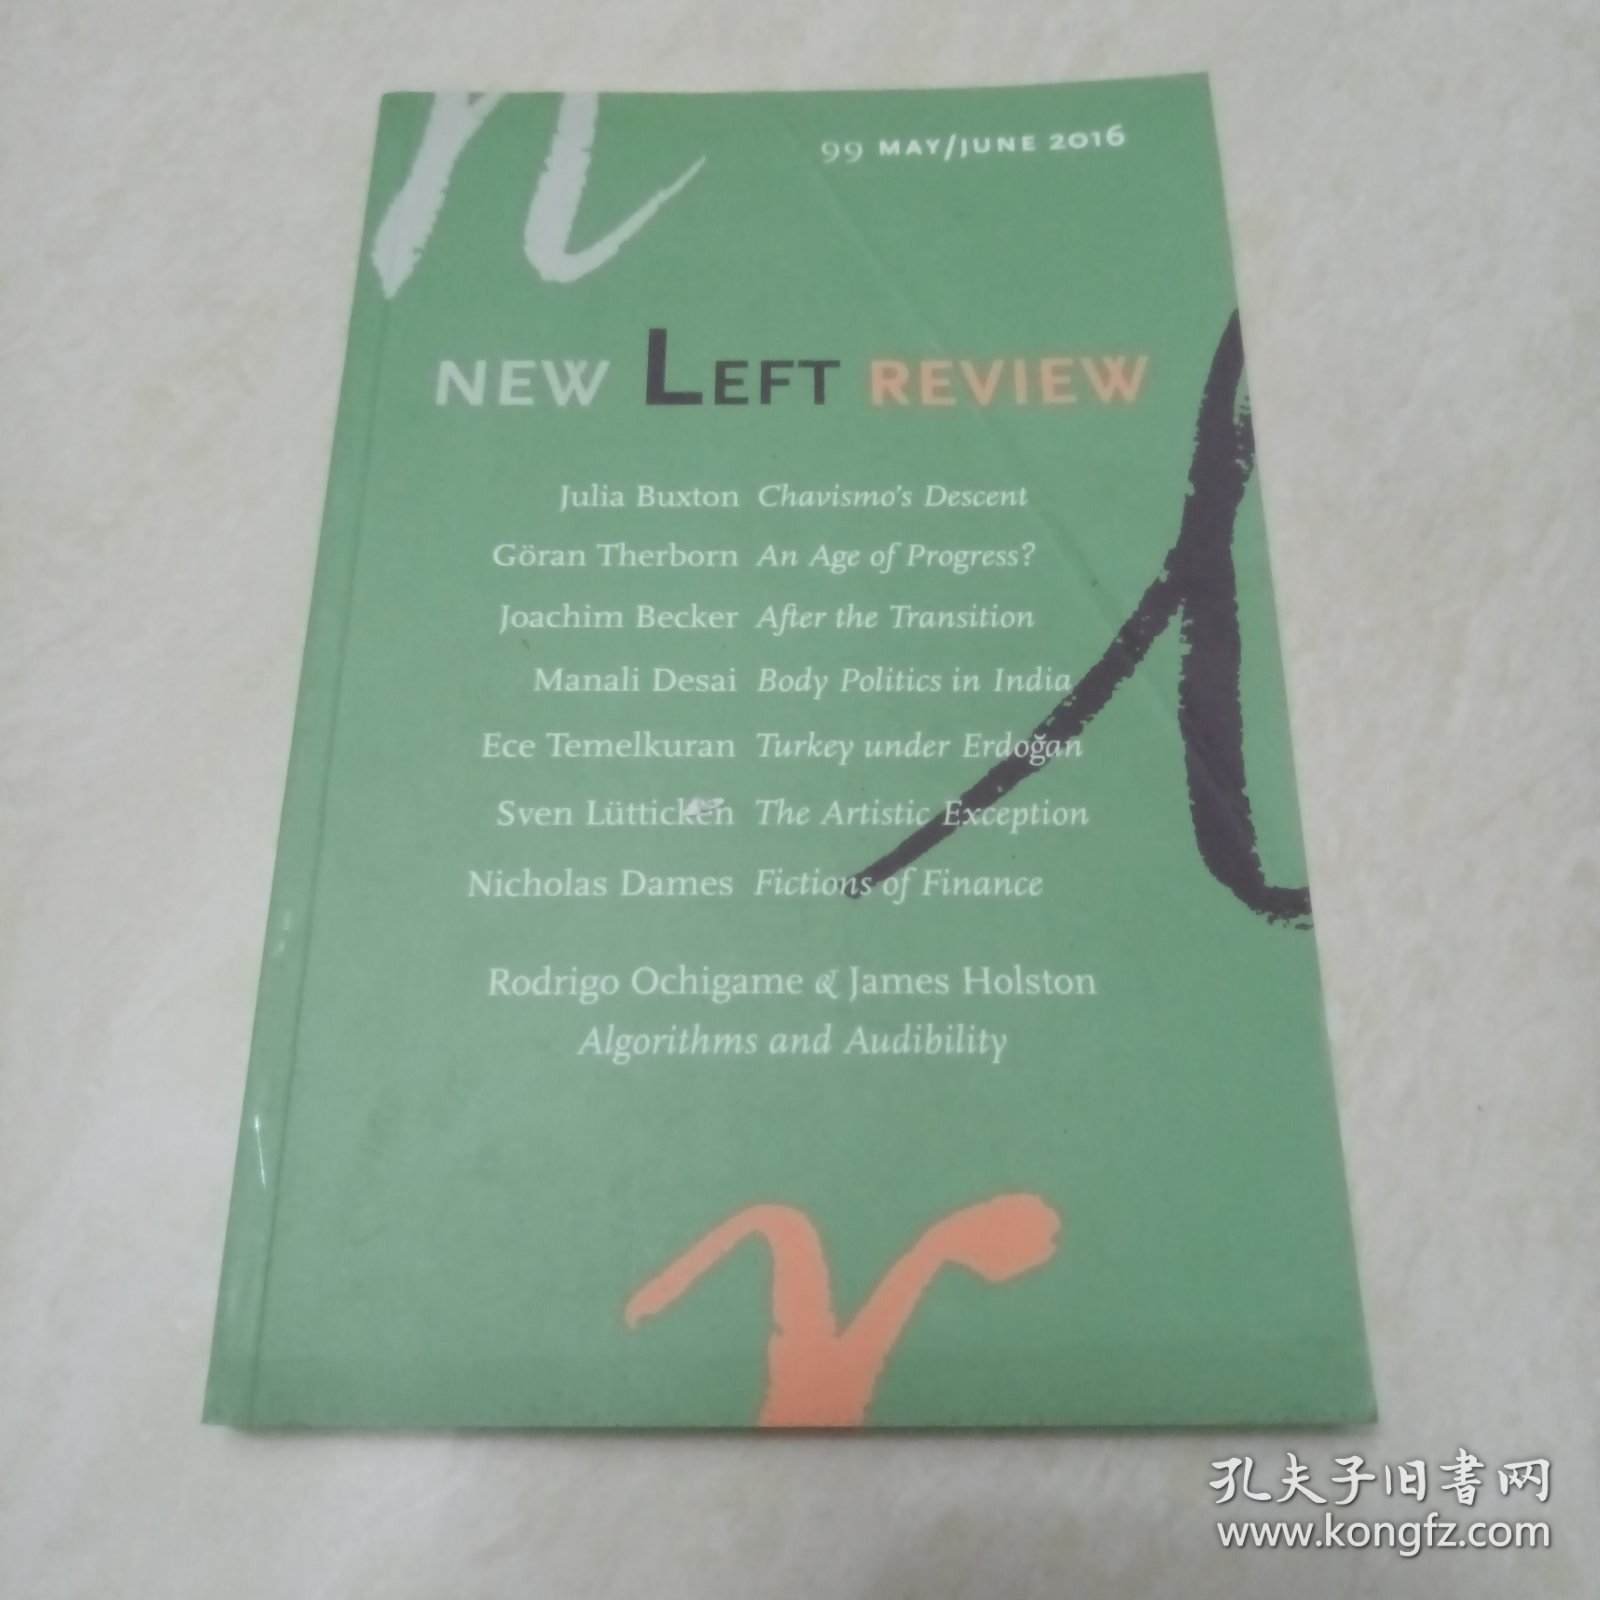 NEW LEFT REVIEW